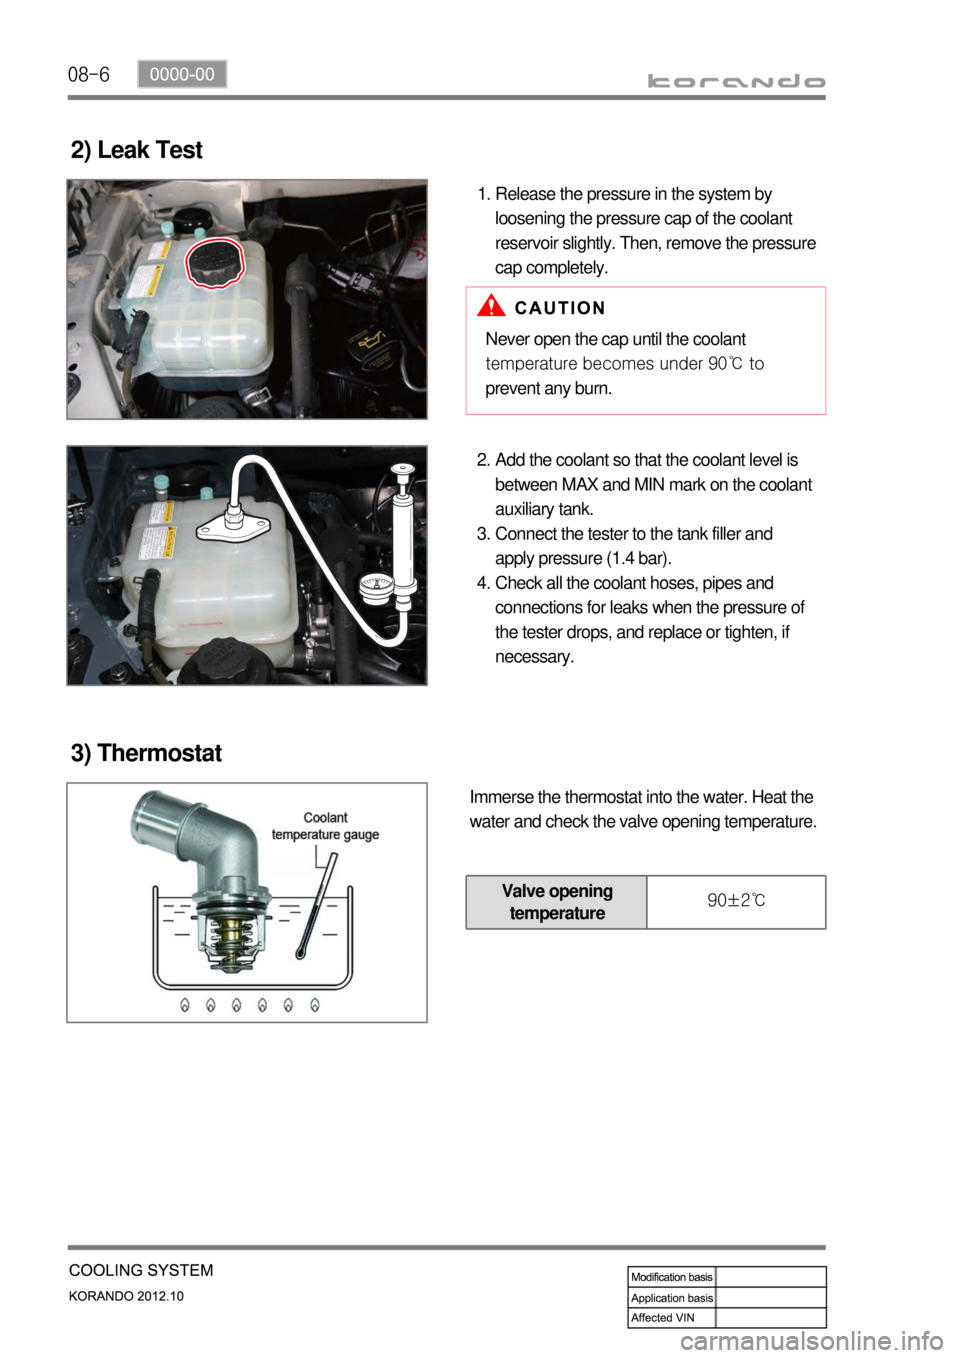 SSANGYONG KORANDO 2012  Service Manual 08-6
2) Leak Test
Release the pressure in the system by 
loosening the pressure cap of the coolant 
reservoir slightly. Then, remove the pressure 
cap completely. 1.
Never open the cap until the coola